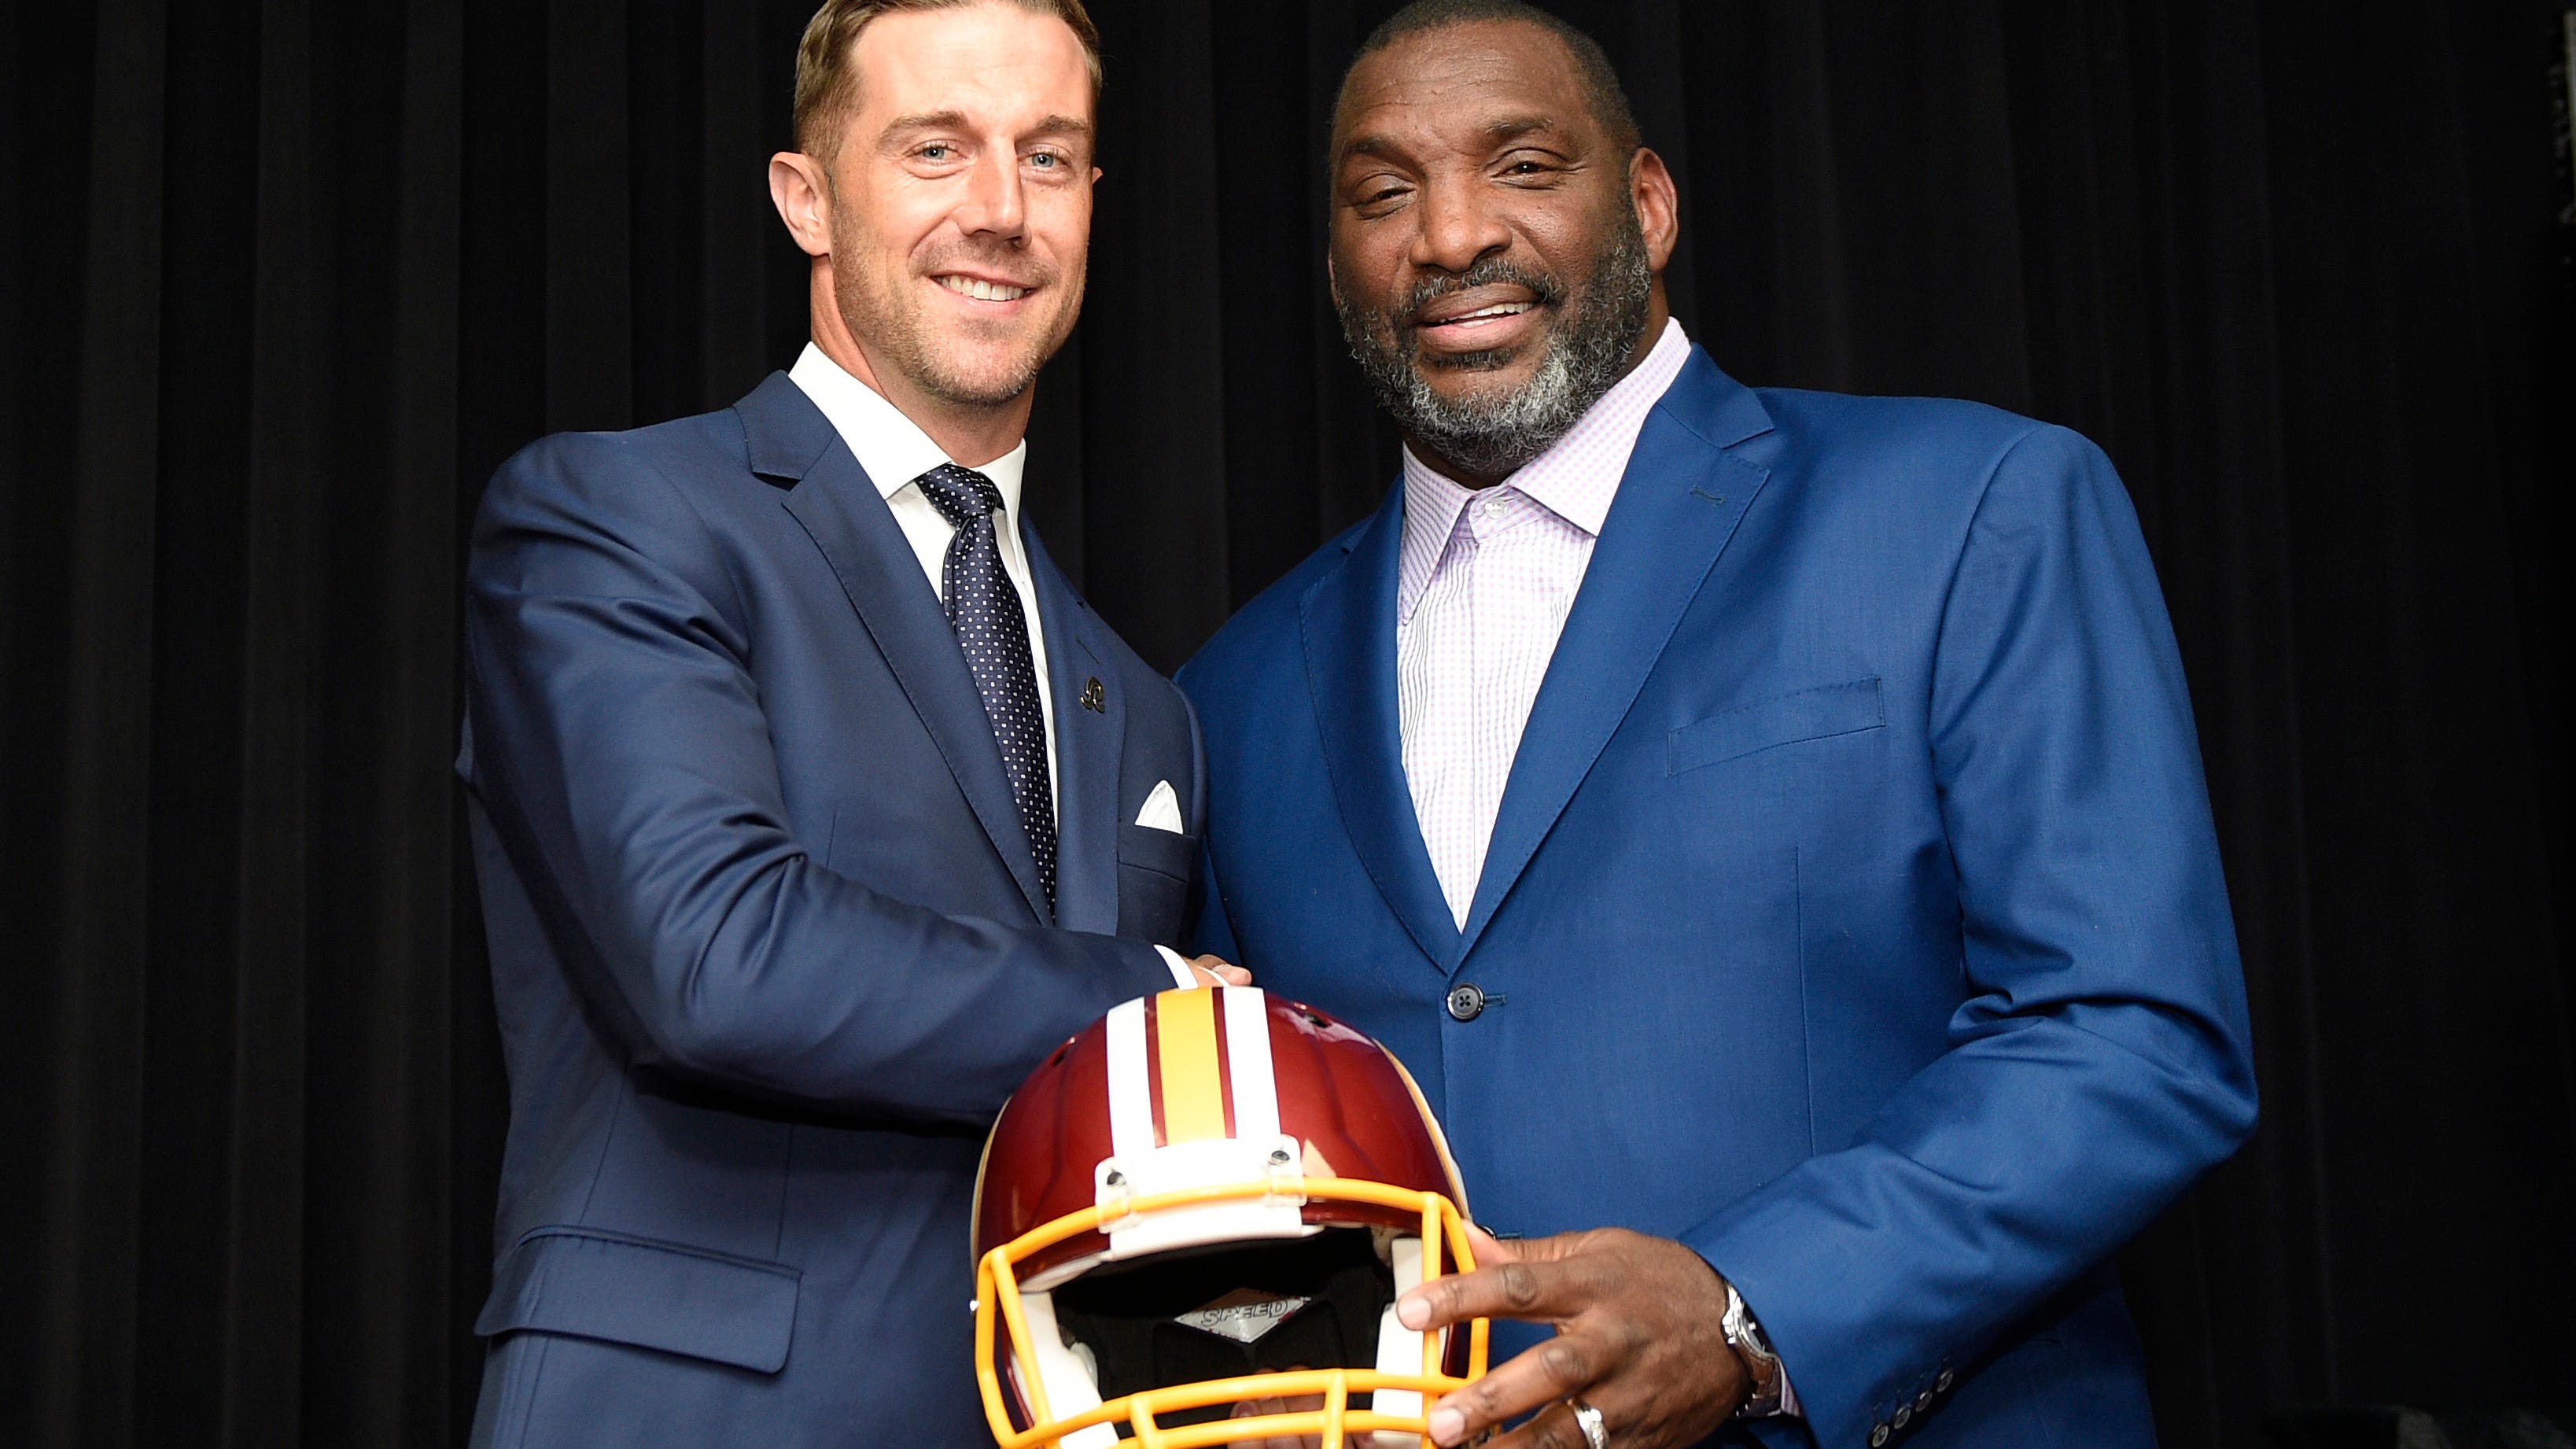 Newly signed Washington Redskins quarterback Alex Smith, left, poses with Doug Williams, the NFL football team's senior vice president of player personnel, during a news conference Thursday, March 15, 2018, in Ashburn, Va. (AP Photo/Nick Wass)